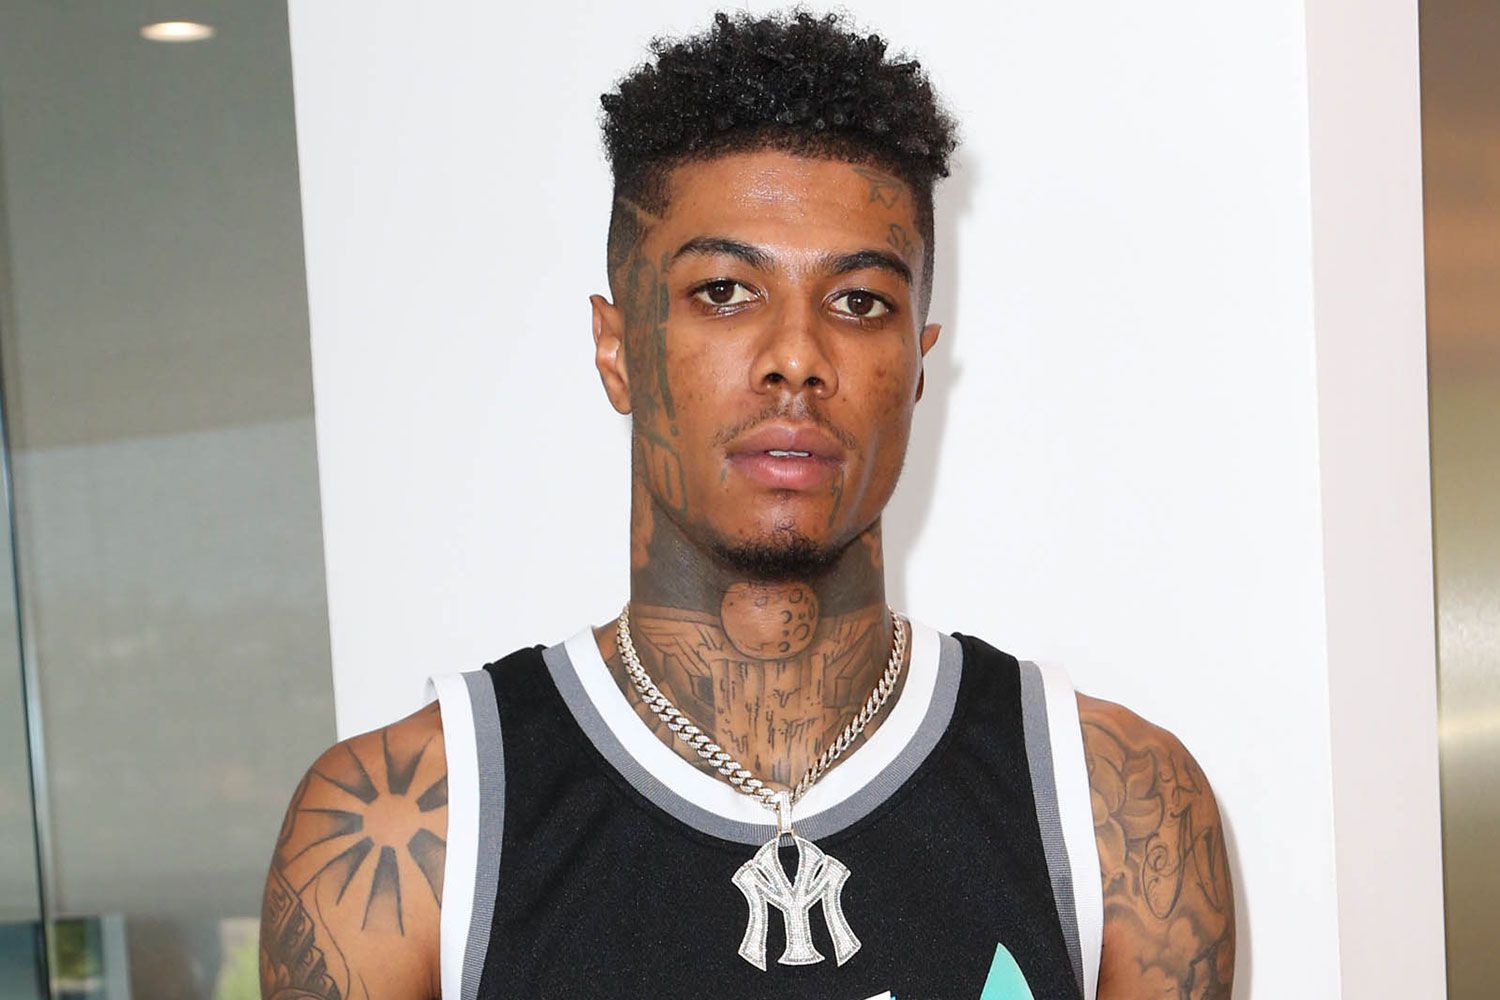 New Development In Blueface Stabbing Case: Rapper’s Non-Cooperation Leaves Investigation At A Standstill